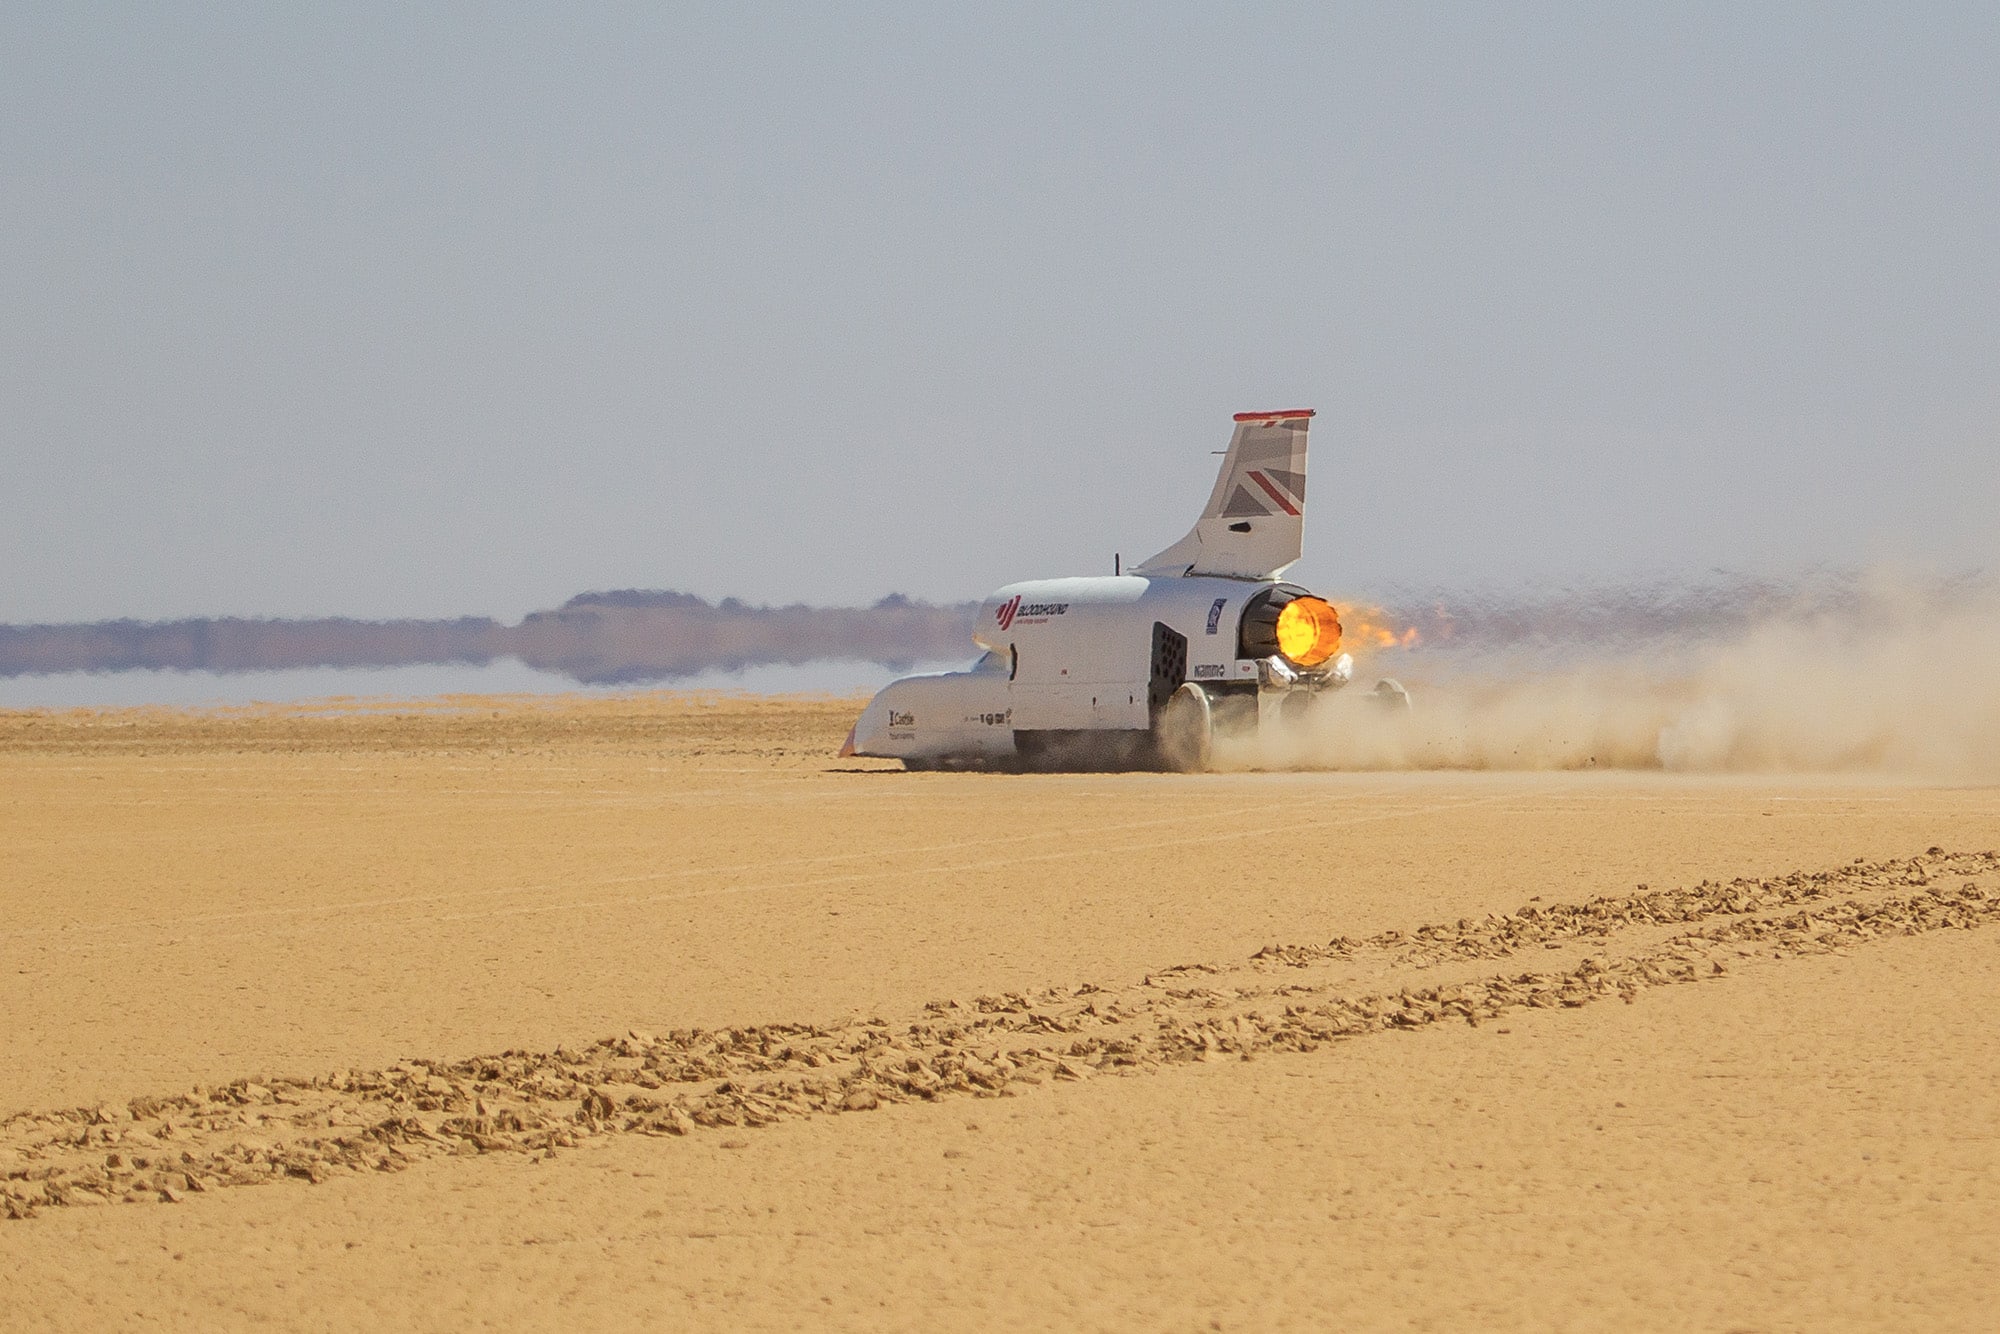 Bloodhound land speed record car during its 501mph run on November 6 2019